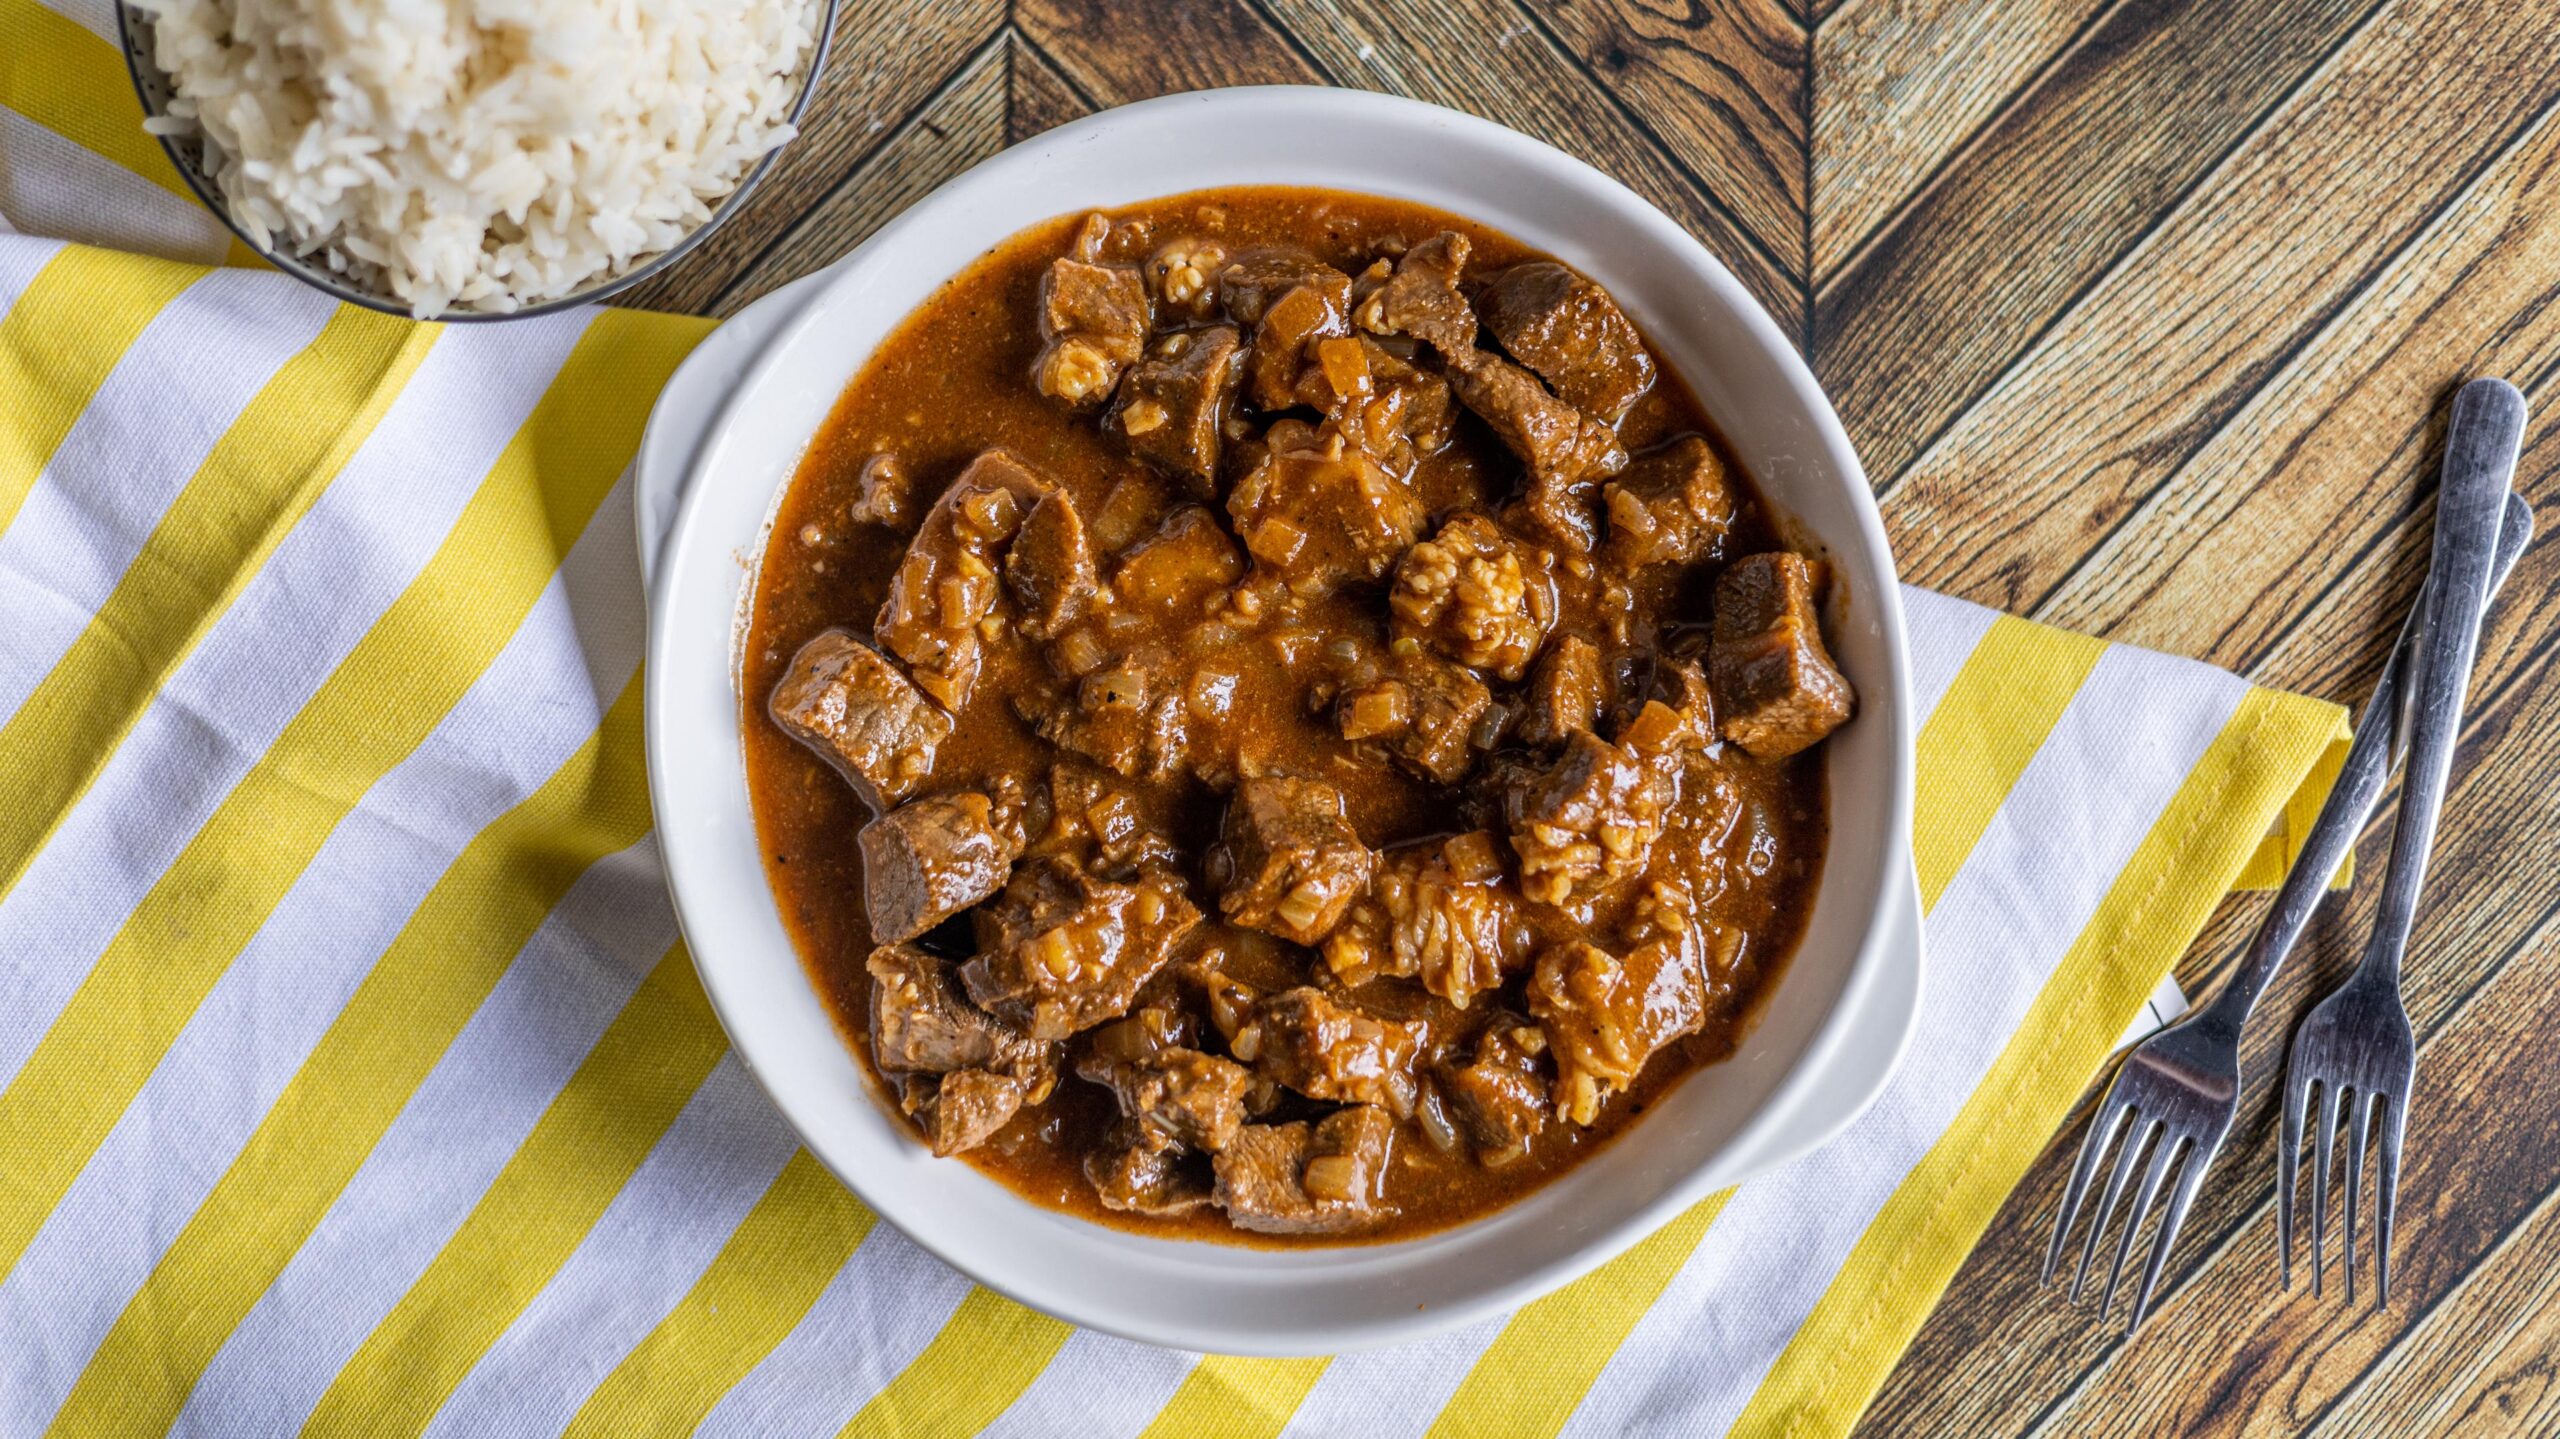 Southern Barbecued Beef Tips